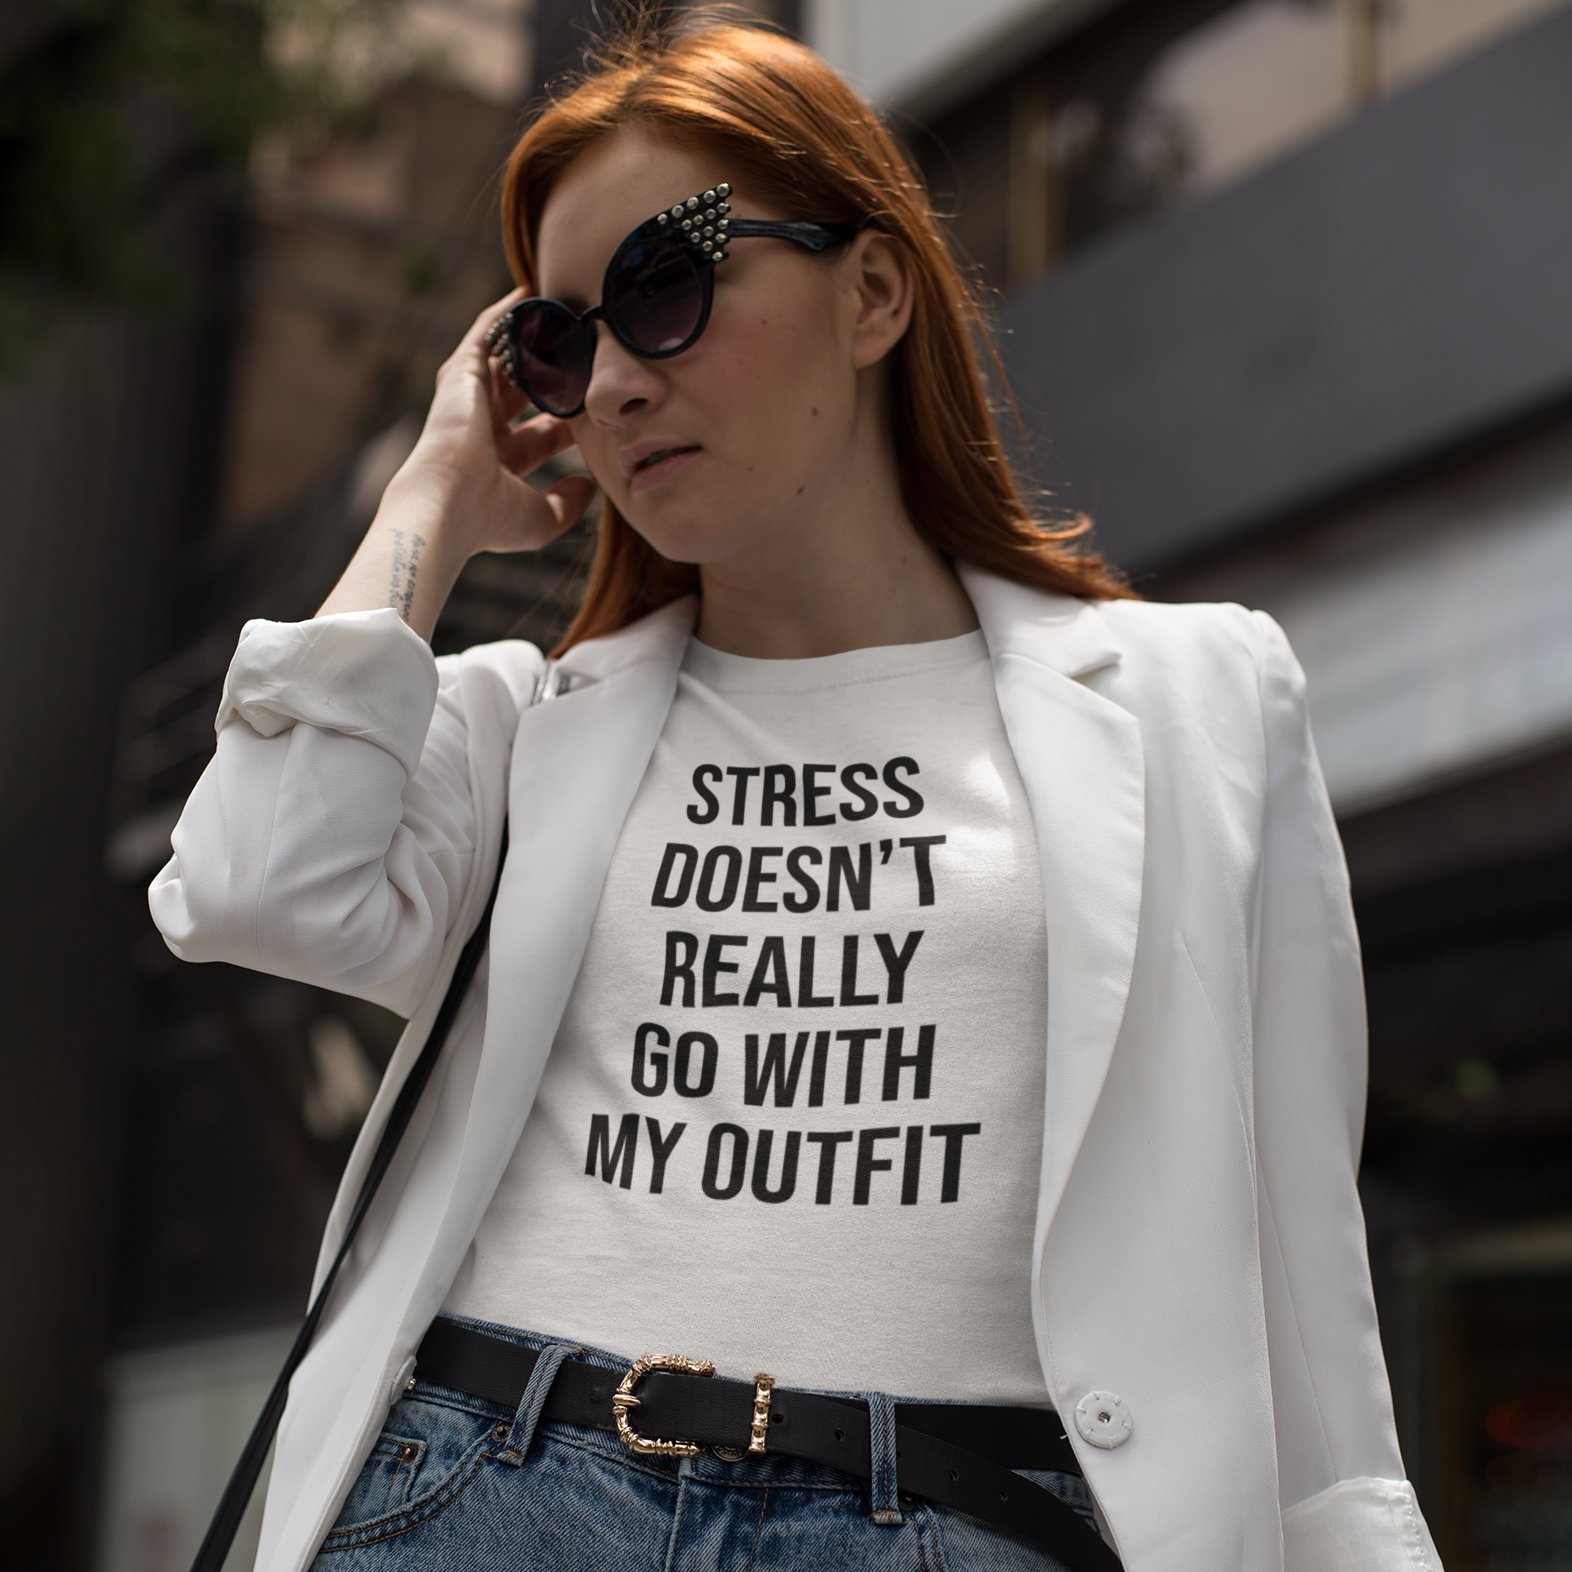 'Stress doesn't really go with my outfit' adult shirt